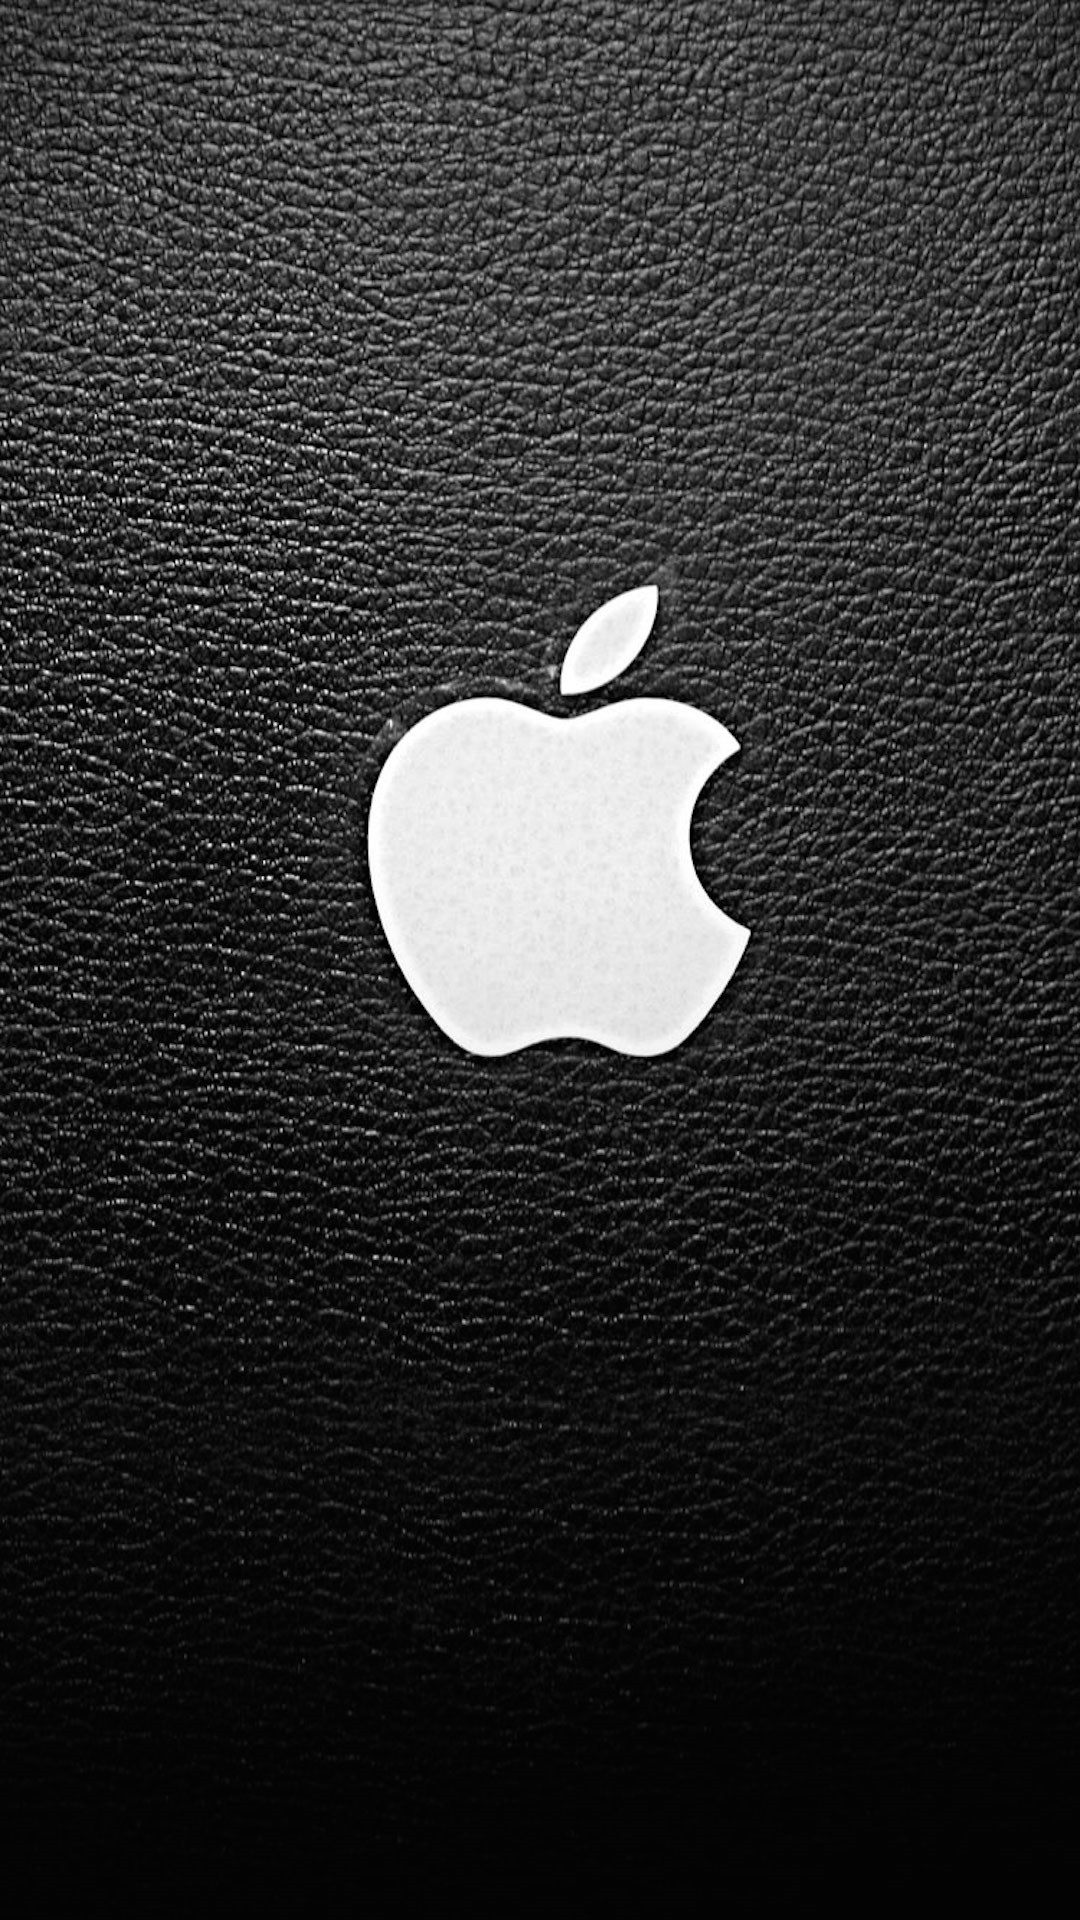 Logo wallpaper for iPhone